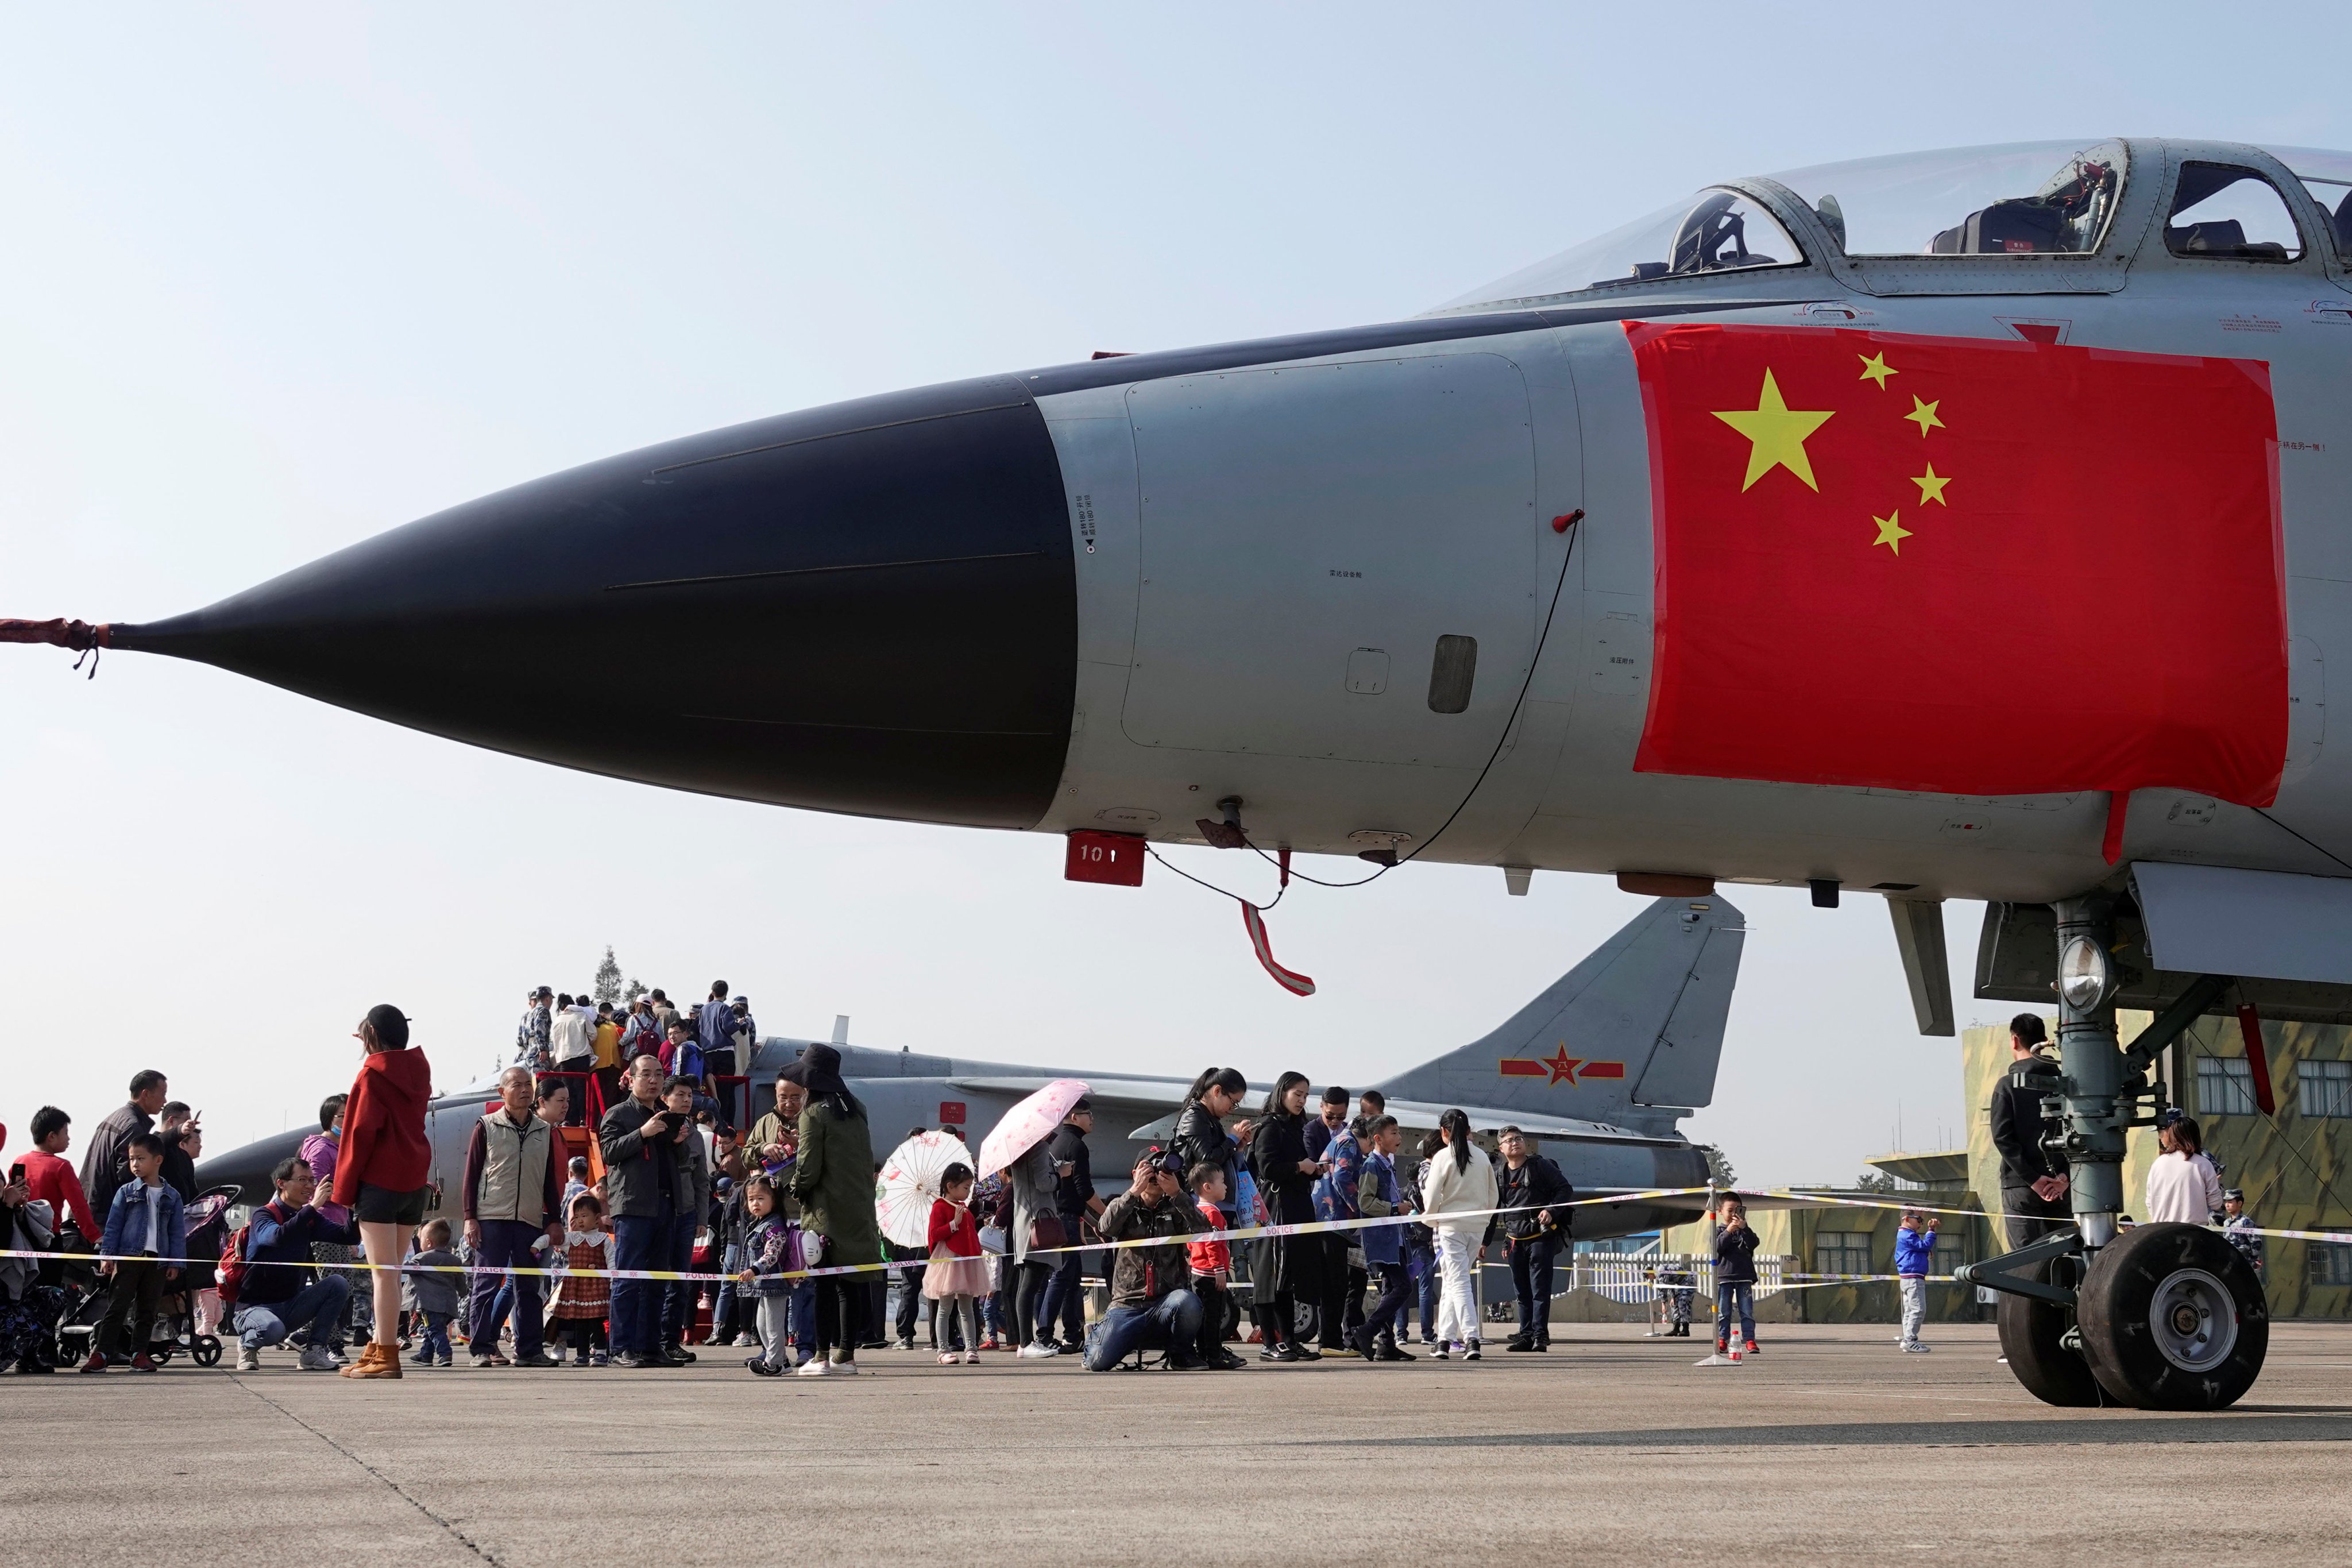 China is looking more to its own defence industry and relying less on imports, according to a new Sipri report. Photo: China Daily via Reuters